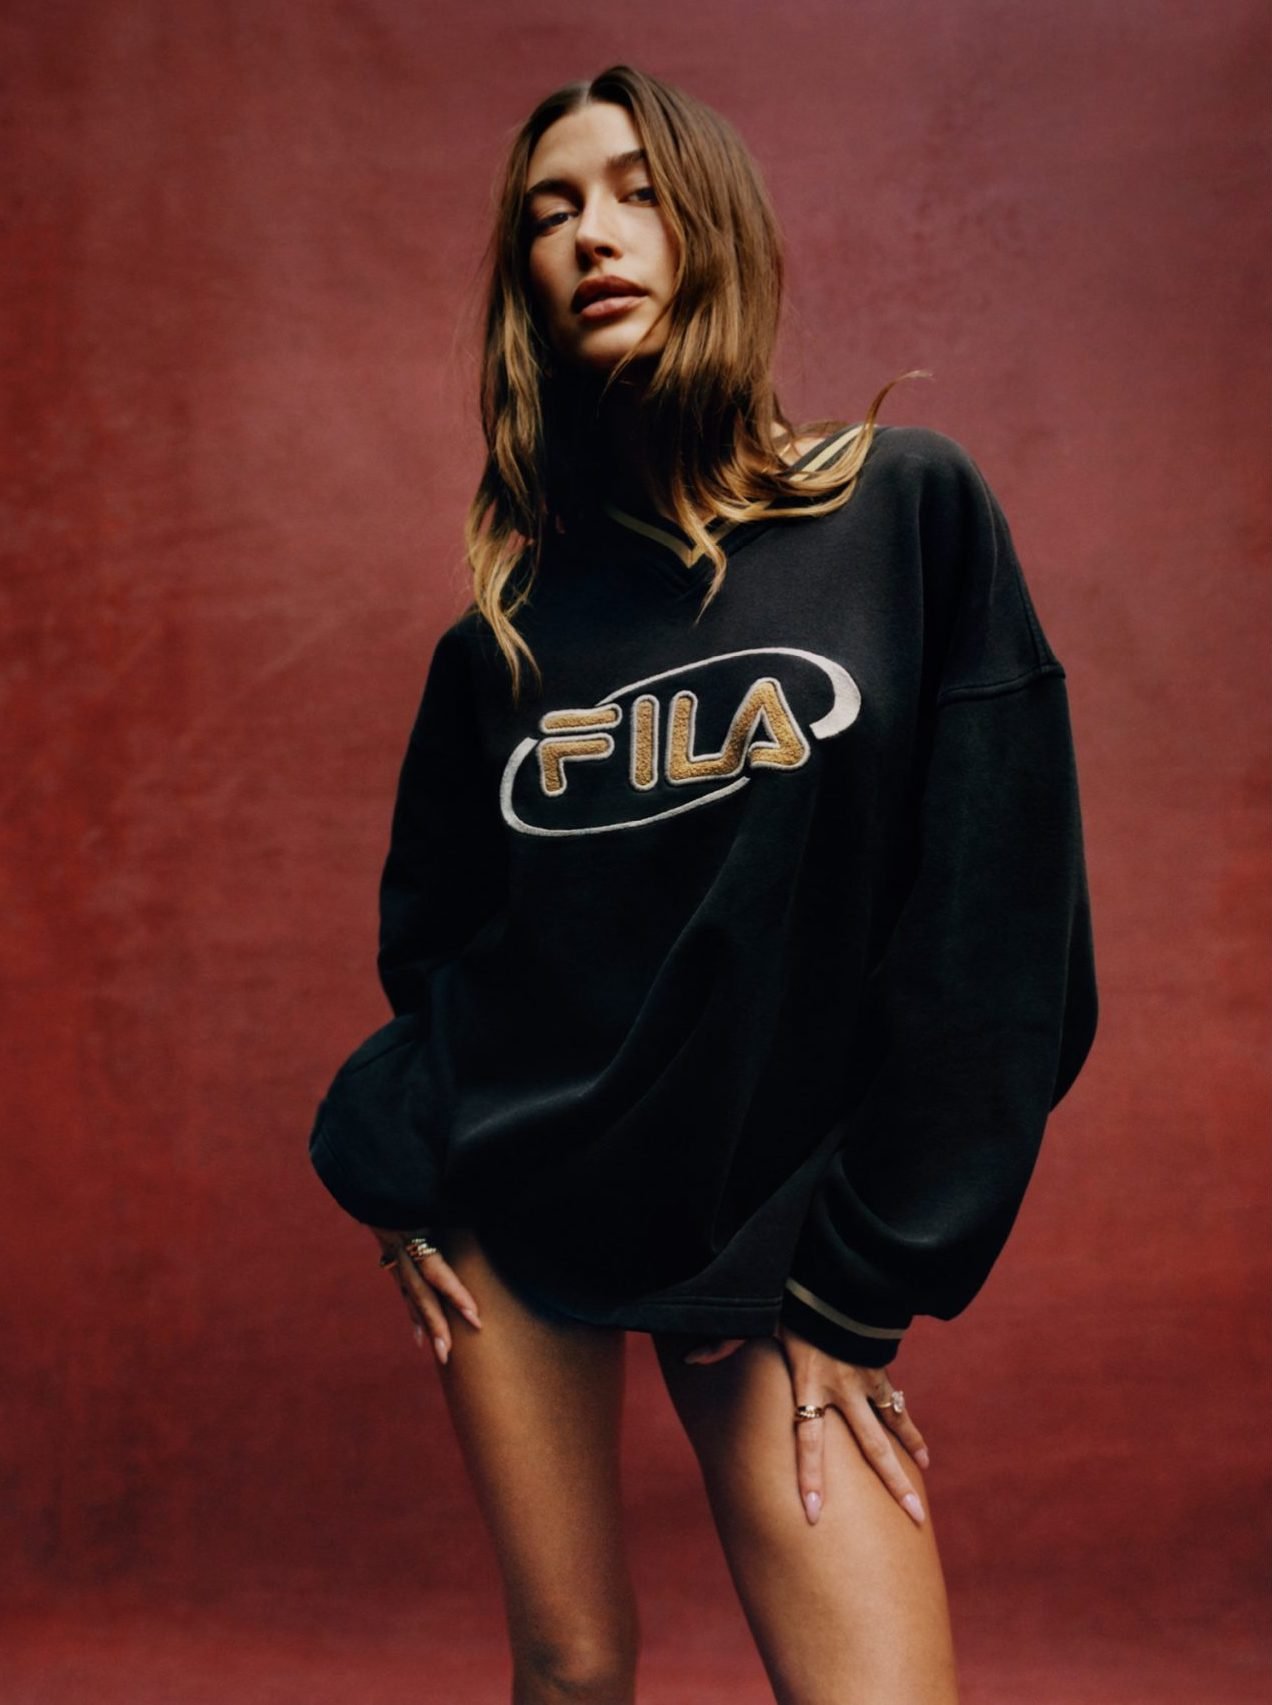 Hailey-Bieber-by-Renell-Medrano-Fila-Ad-Campaign00004.jpeg